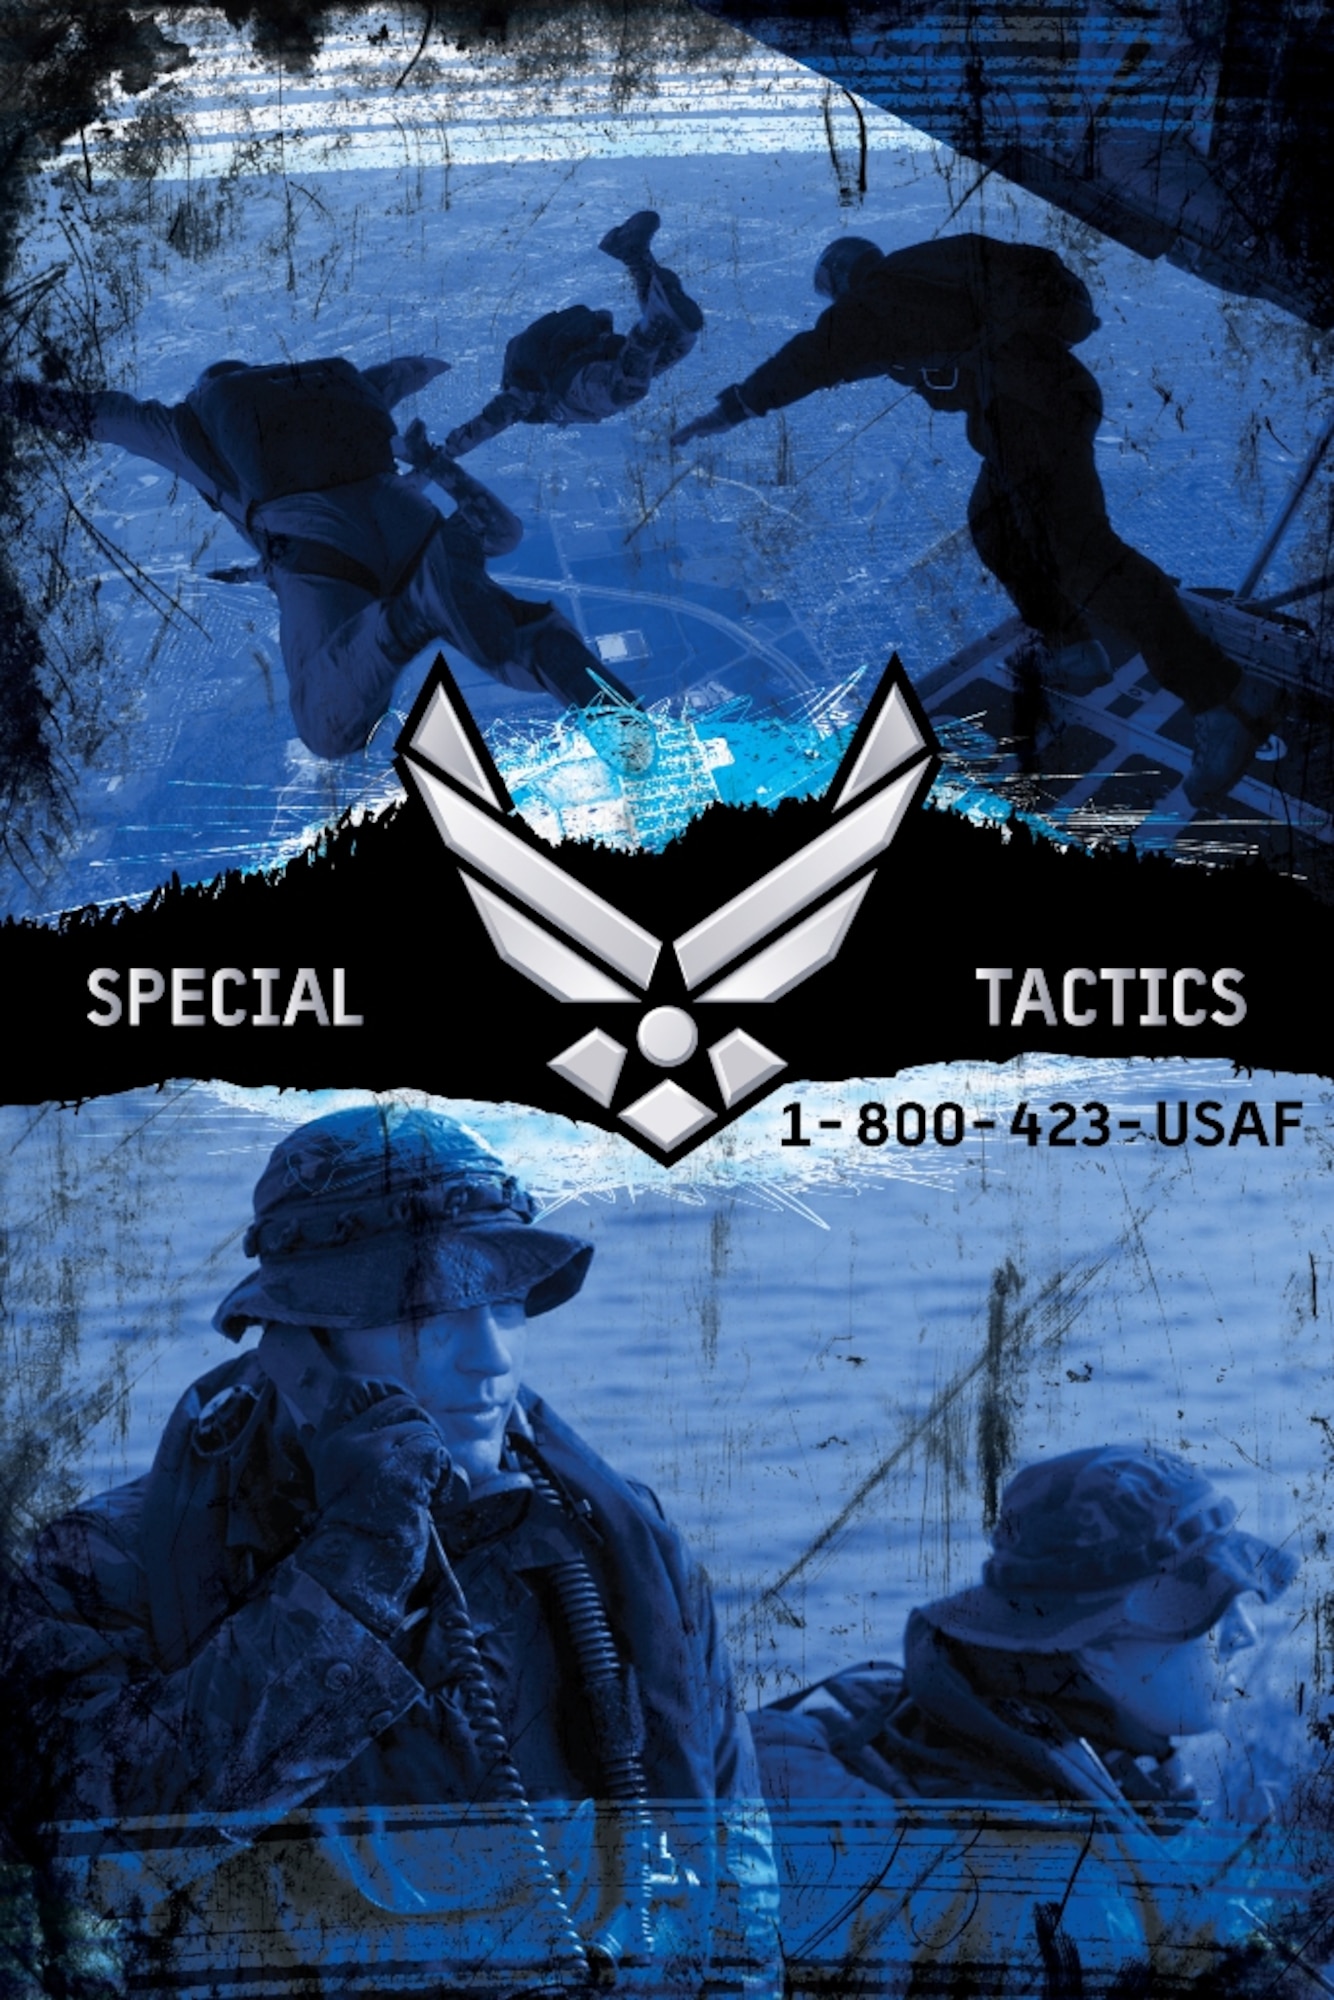 Tech. Sgt. David Hahn, Charlotte, N.C. MEPS liaison supervisor, has designed many billboards and posters including this Battlefield Airmen poster. Hahn is a self taught graphic artist who offers his hobby to the Air Force to assist recruiting efforts. (U.S. Air Force graphic/Tech. Sgt. David Hahn)